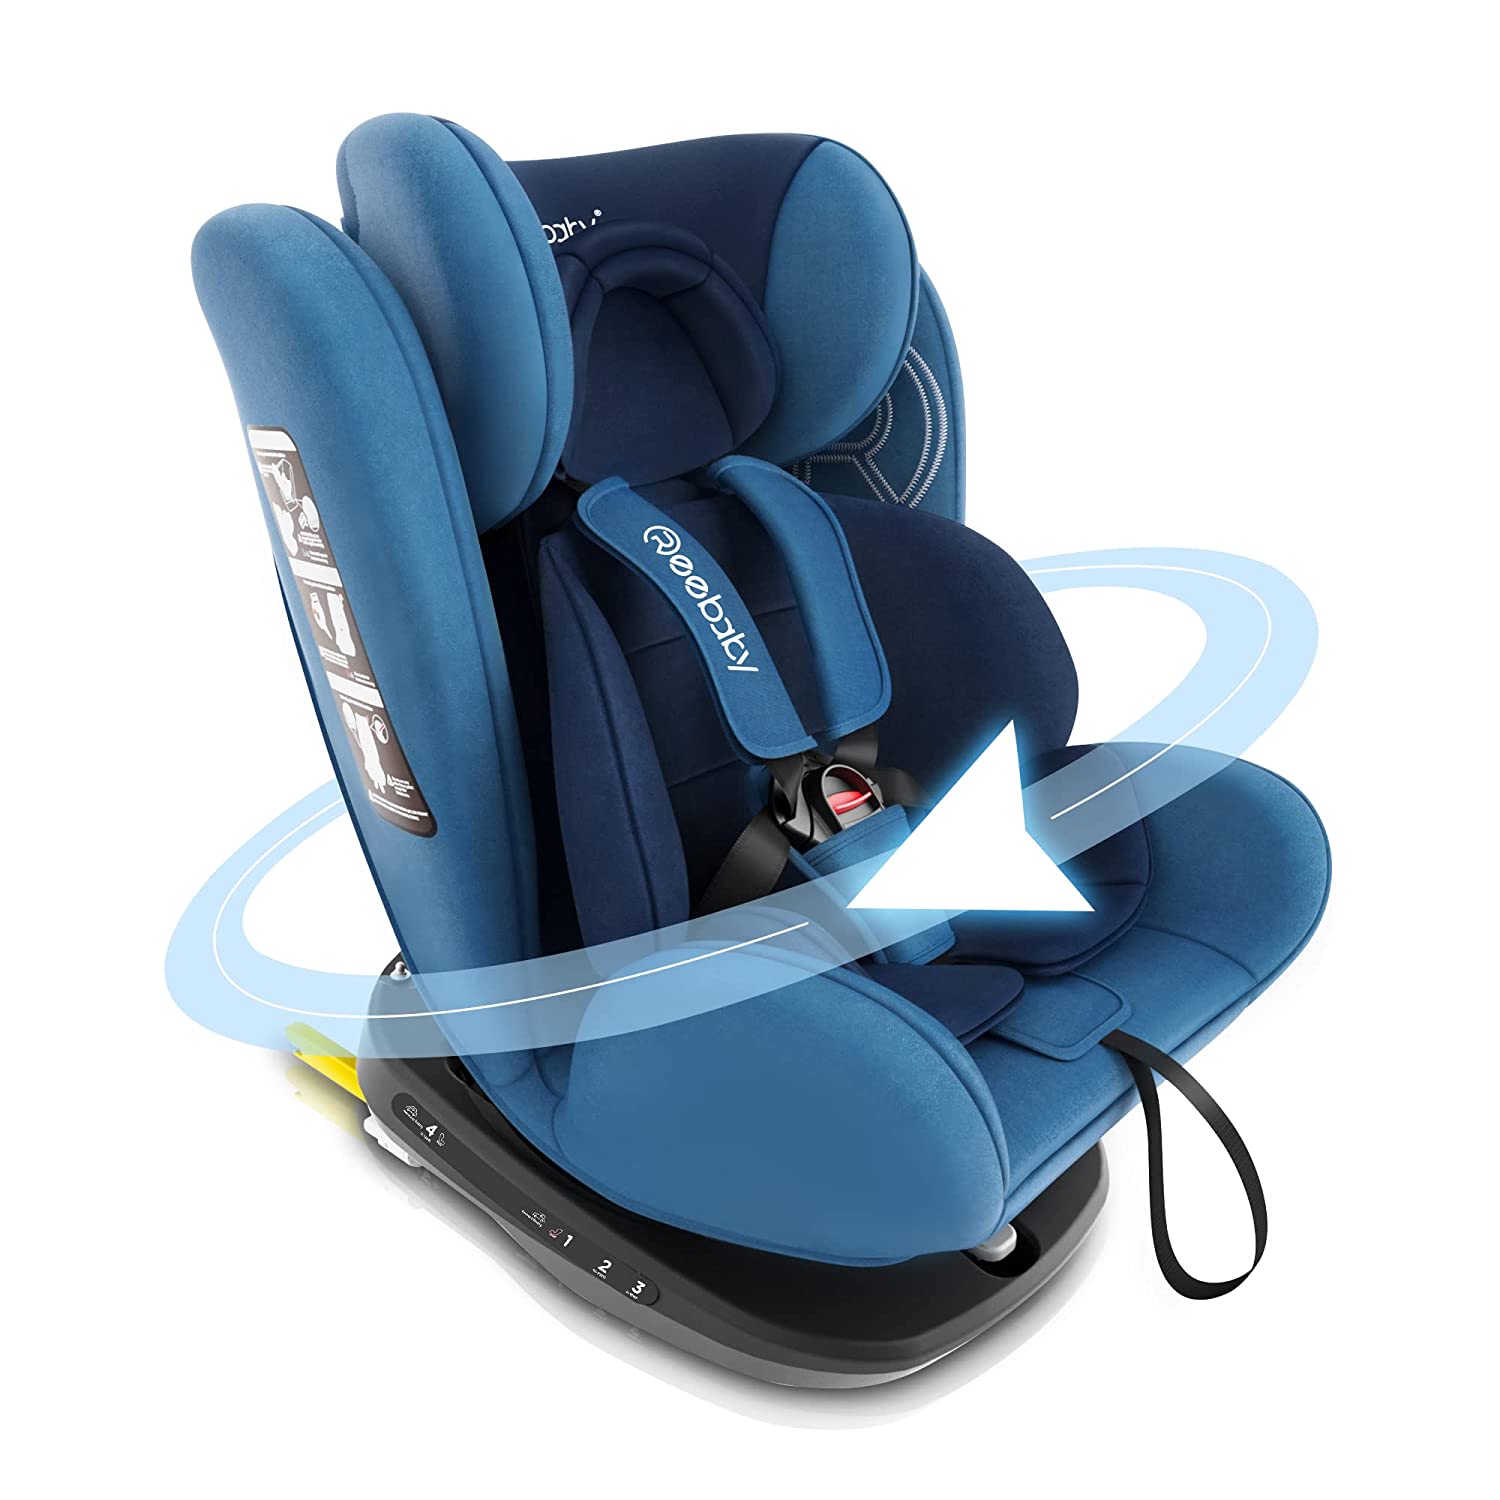 Reebaby Baby Car Seat 360° Rotatable Group 0+1/2/3 (0-36 kg/0-12 Years) with Side Protectors Isofix Top Tether ECE R44/04